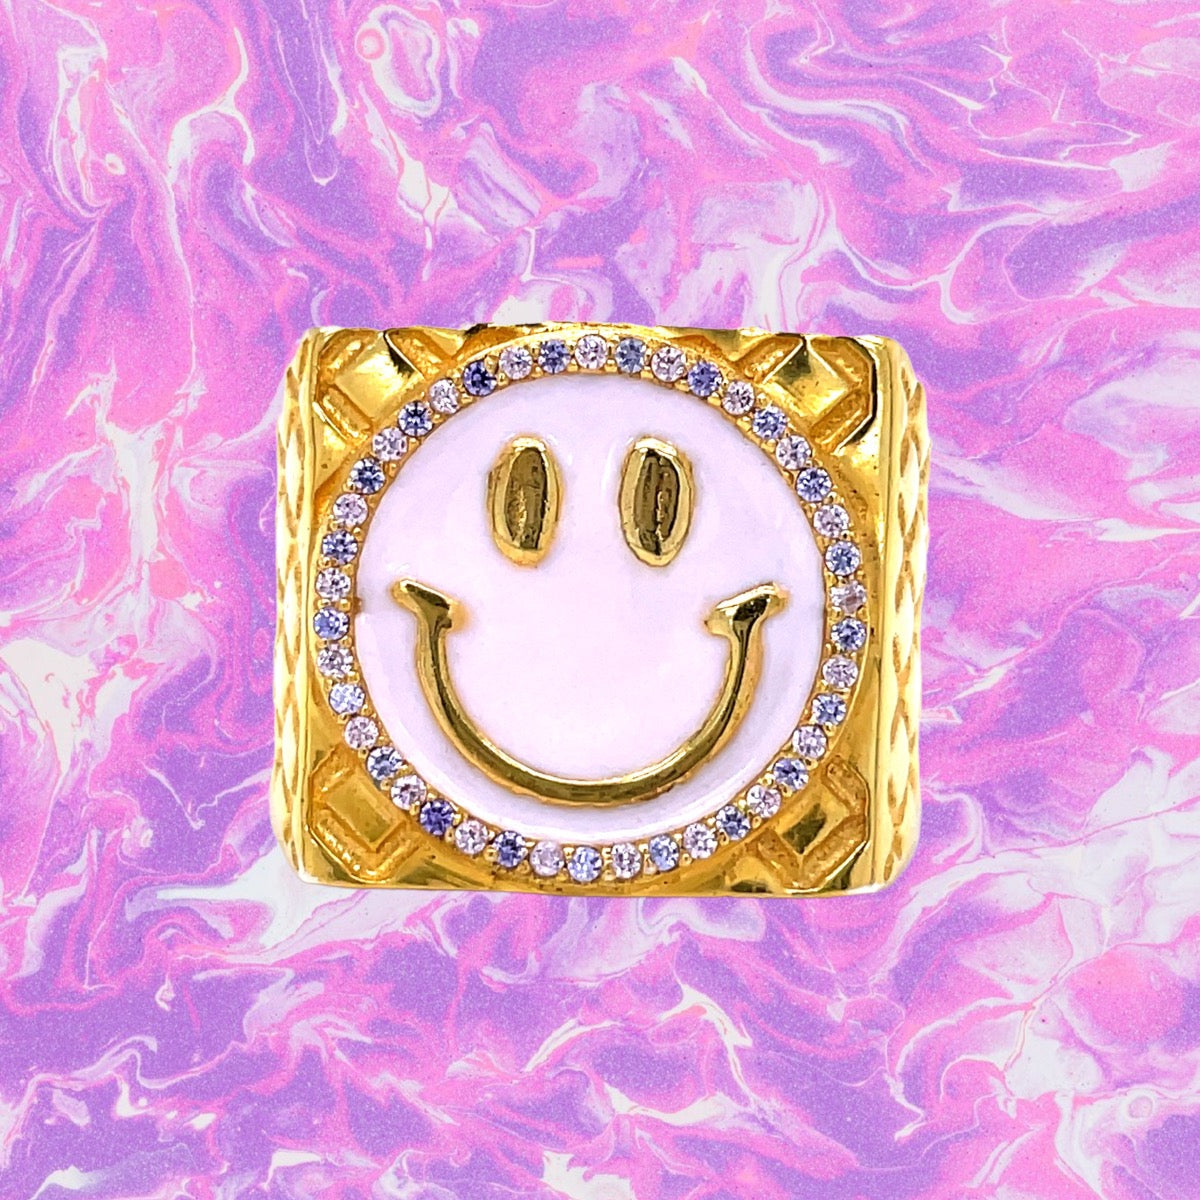 The Acid House Smiley Ring